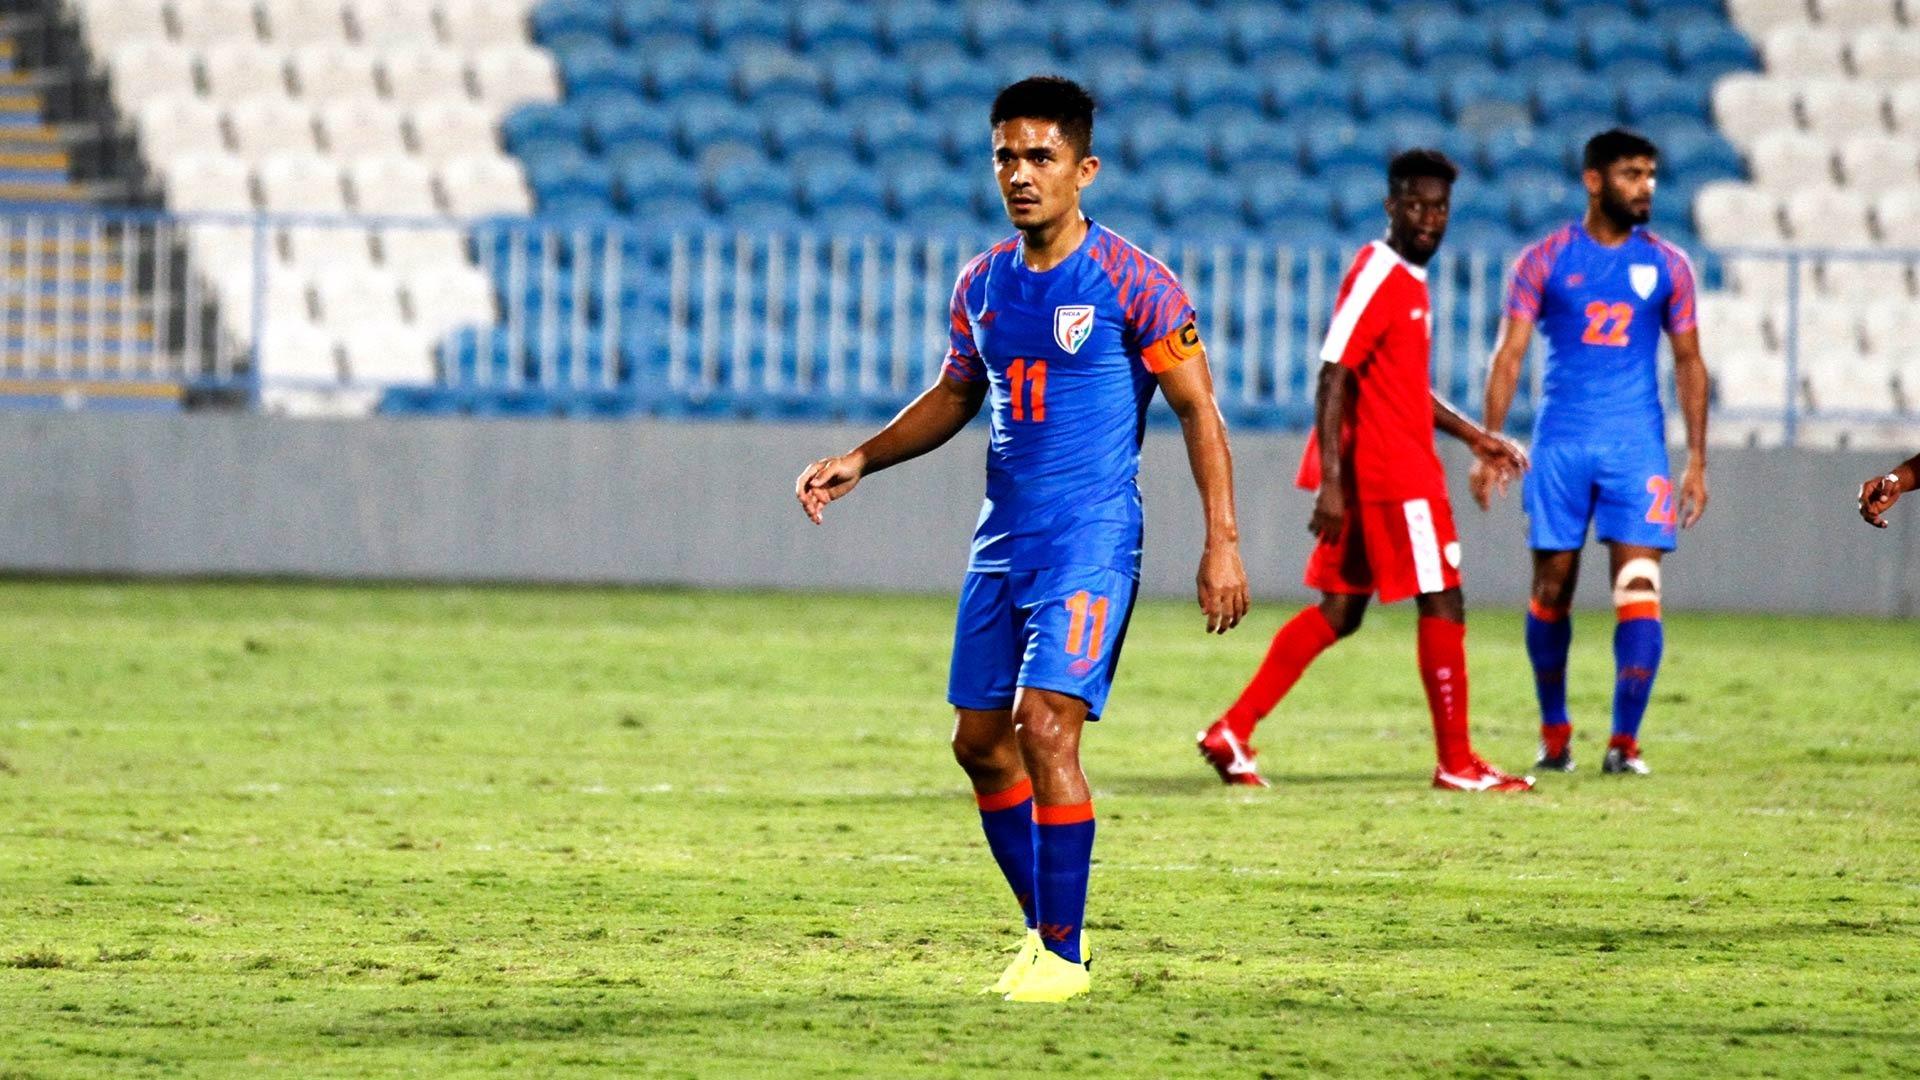 Facing the Blue Tigers won't be easy for other teams: Sunil Chhetri